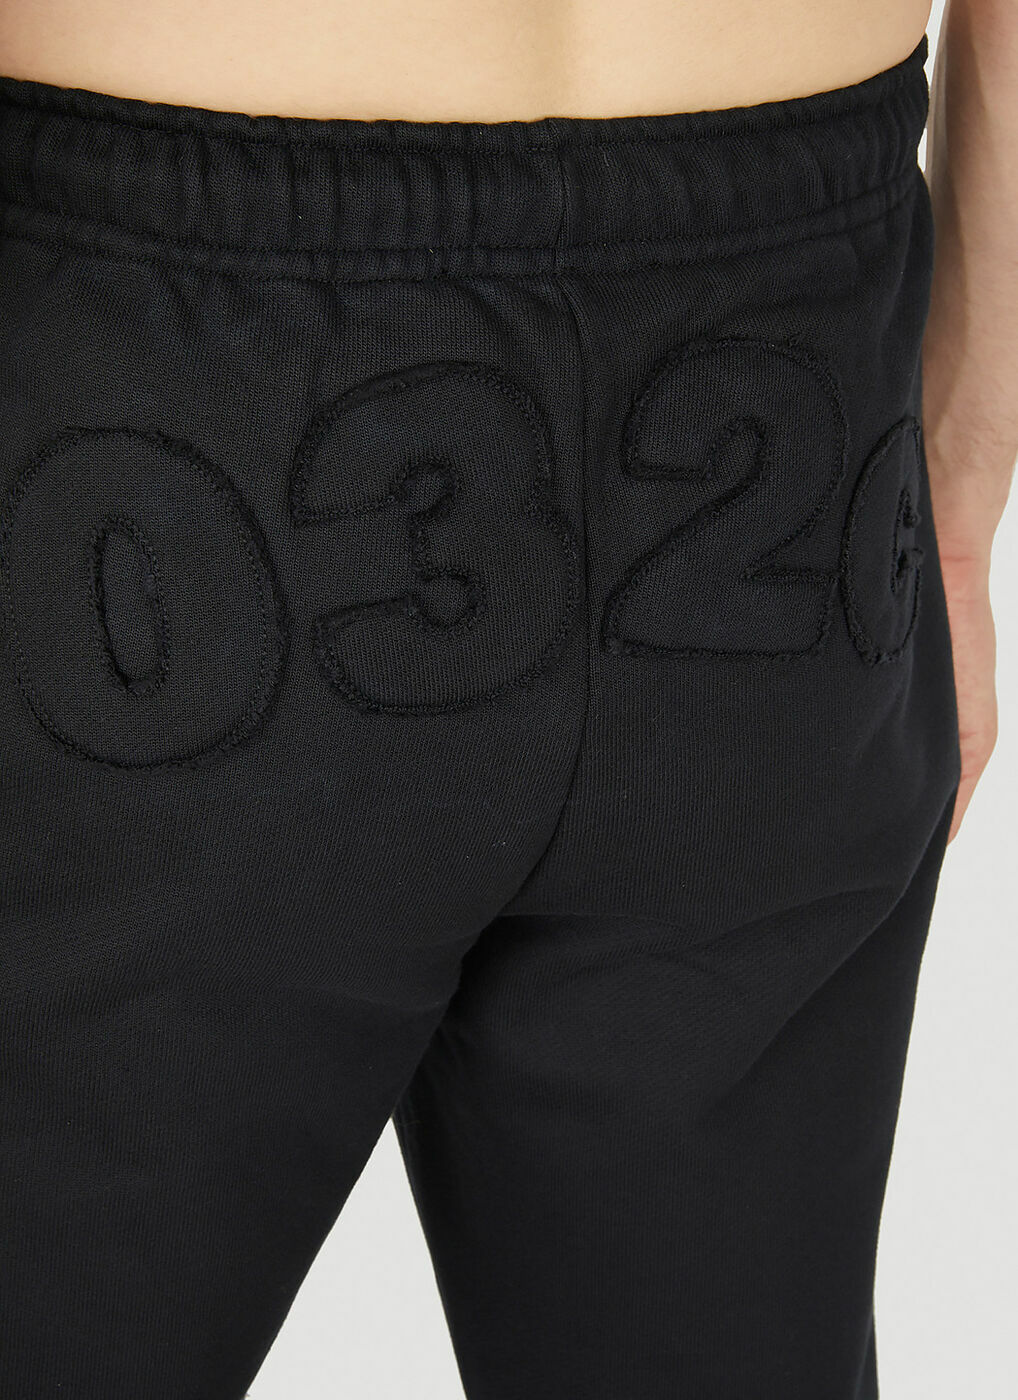 Flared Track Pants in Black